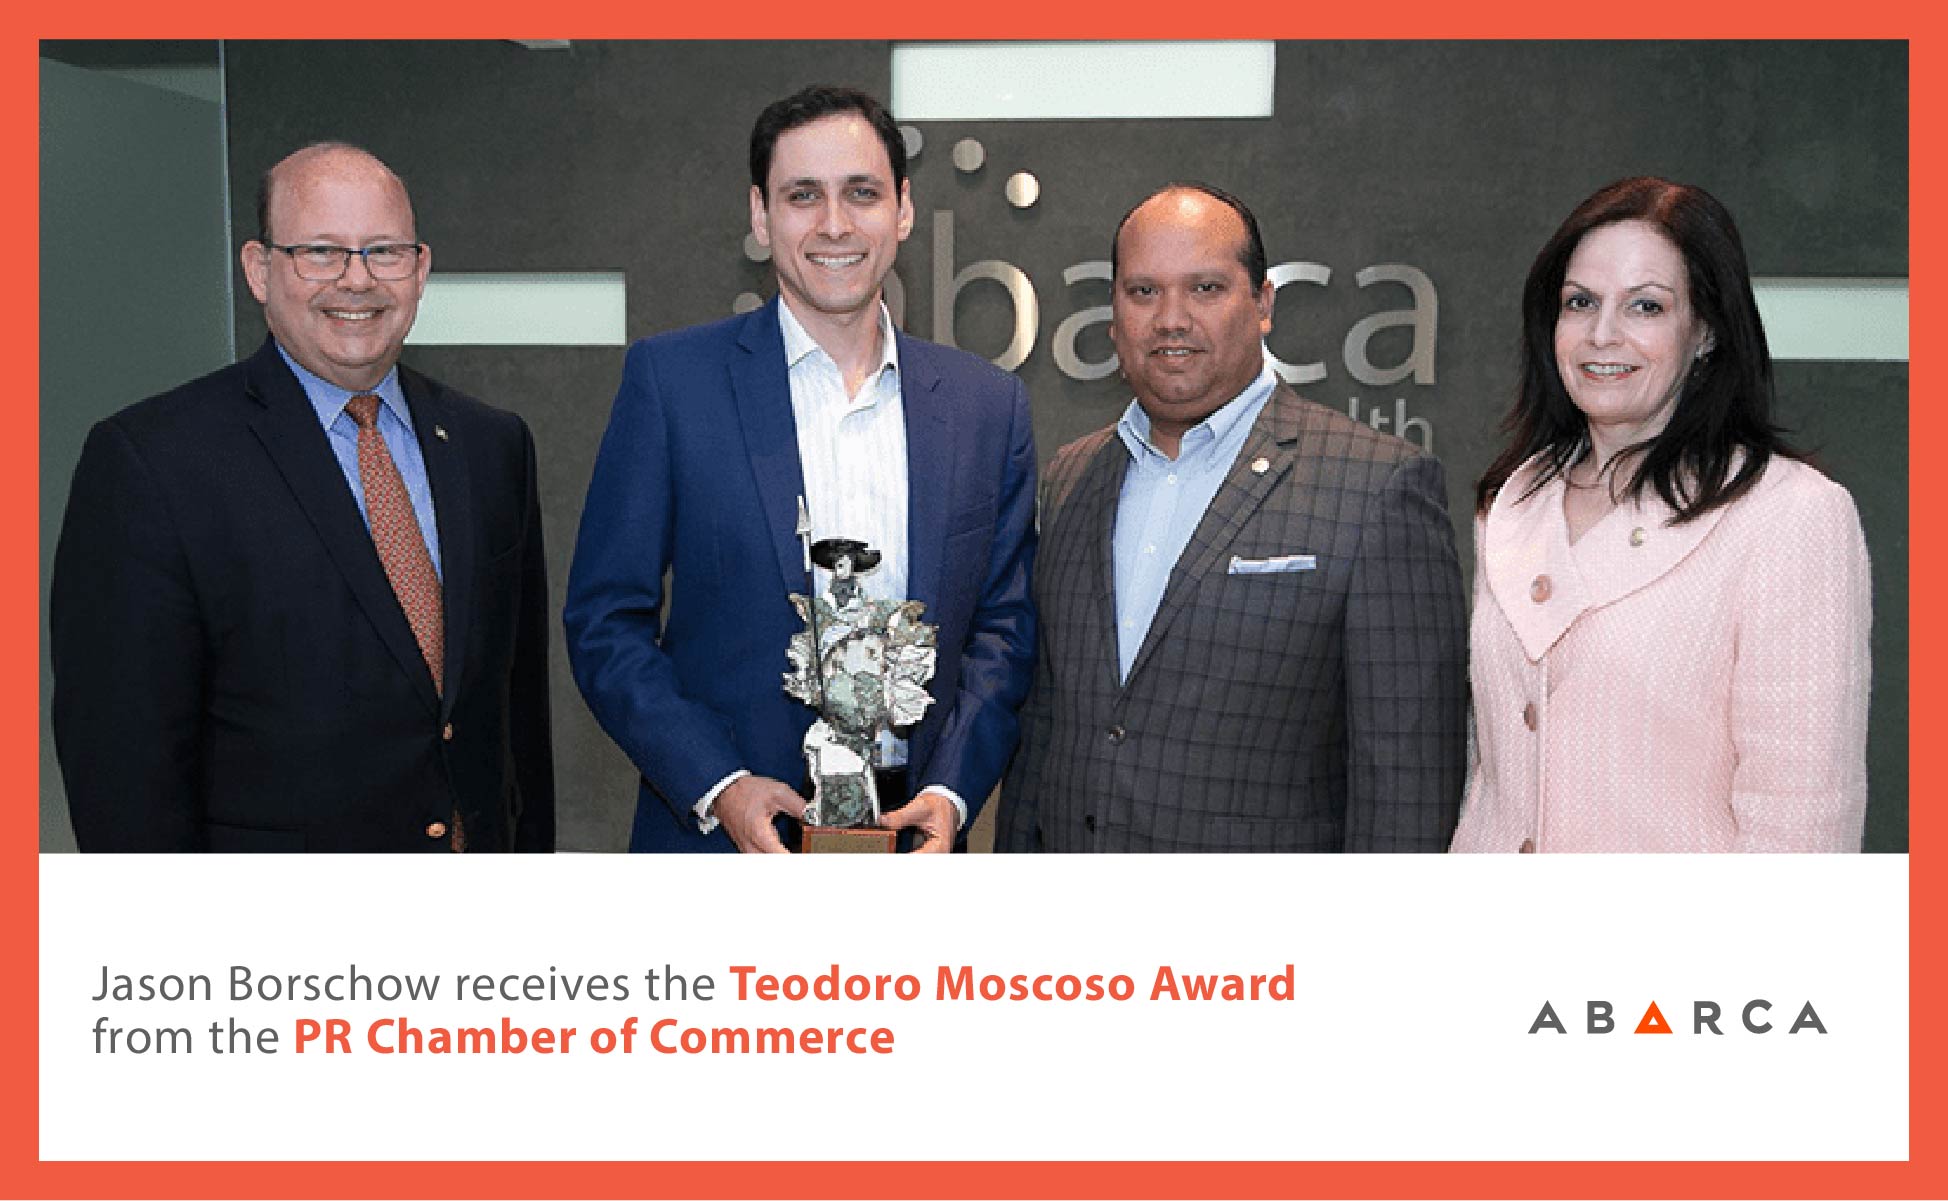 Abarca Health: Jason Borschow receives the Teodoro Moscoso Award from the PR Chamber of Commerce